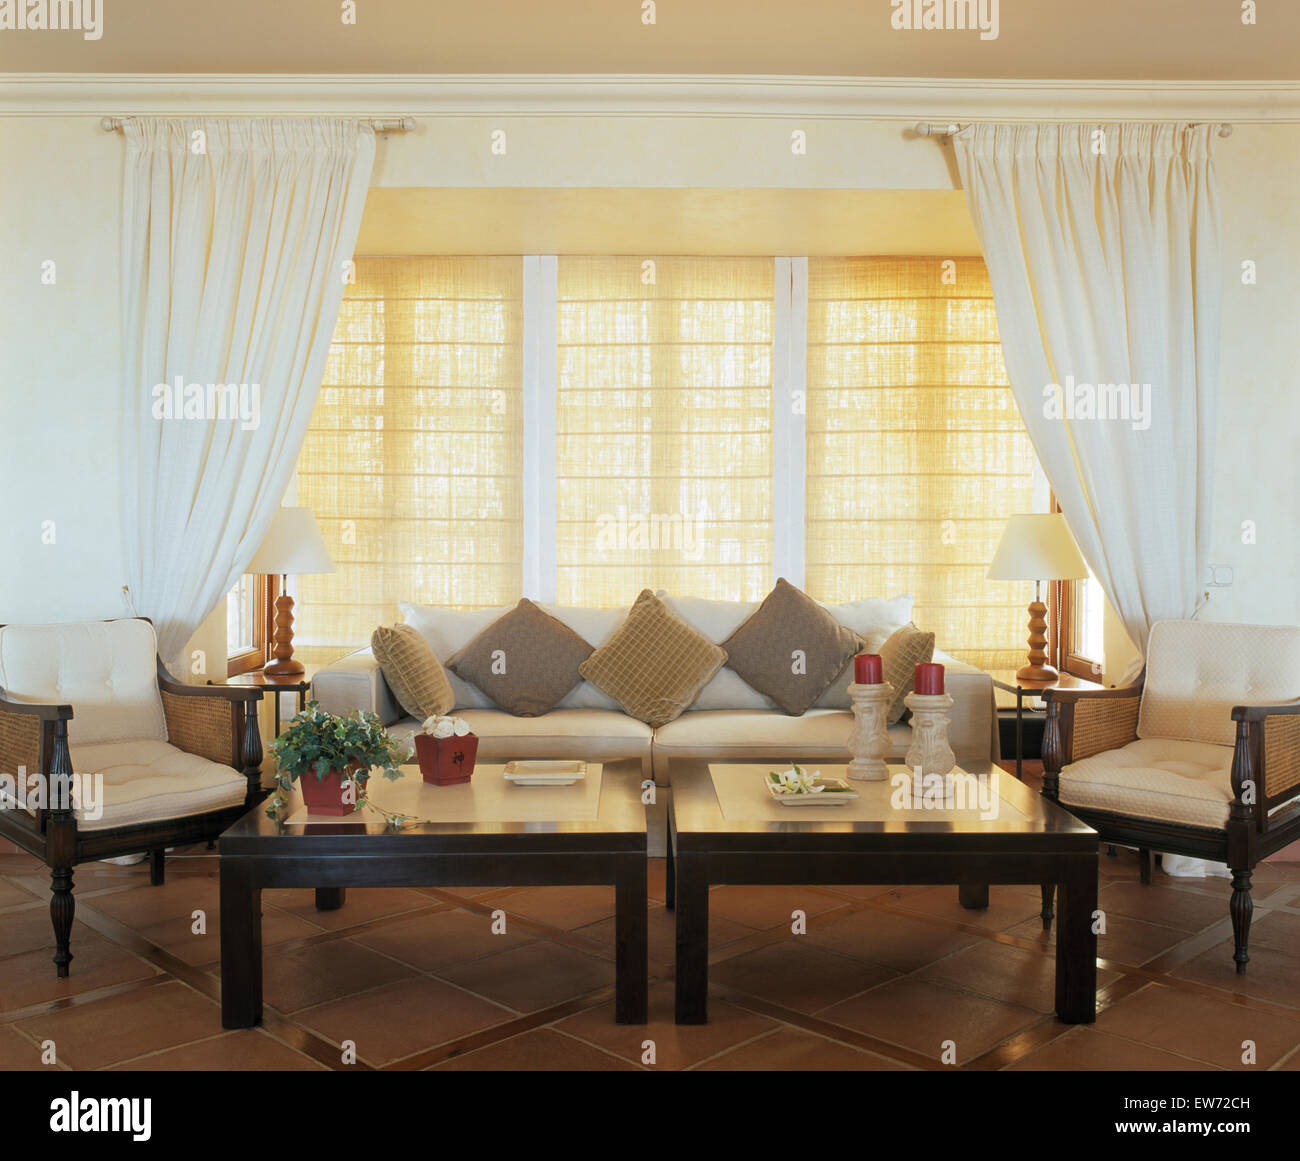 White Curtains And Split Cane Blinds On The Window In Spanish